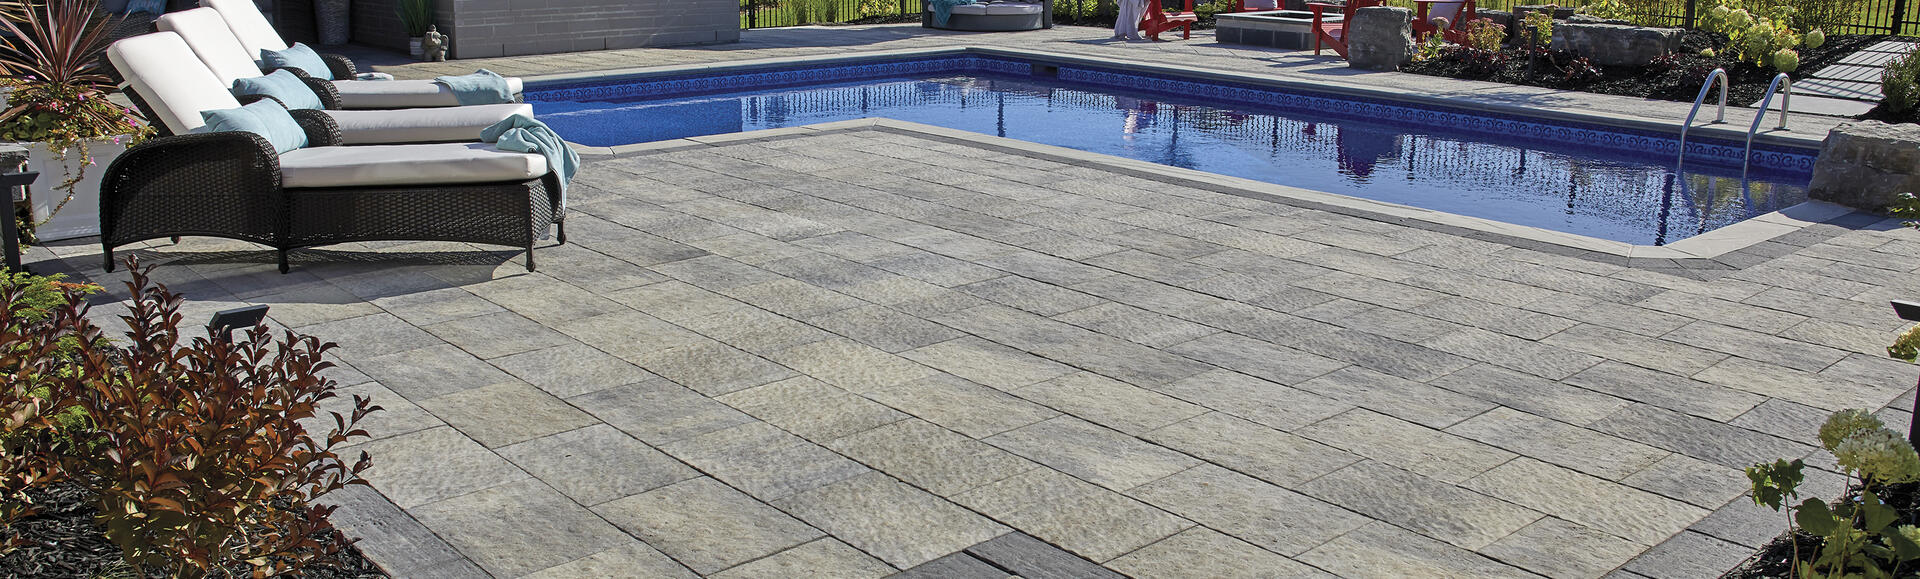 Patio with pool using Rialto products from Oaks